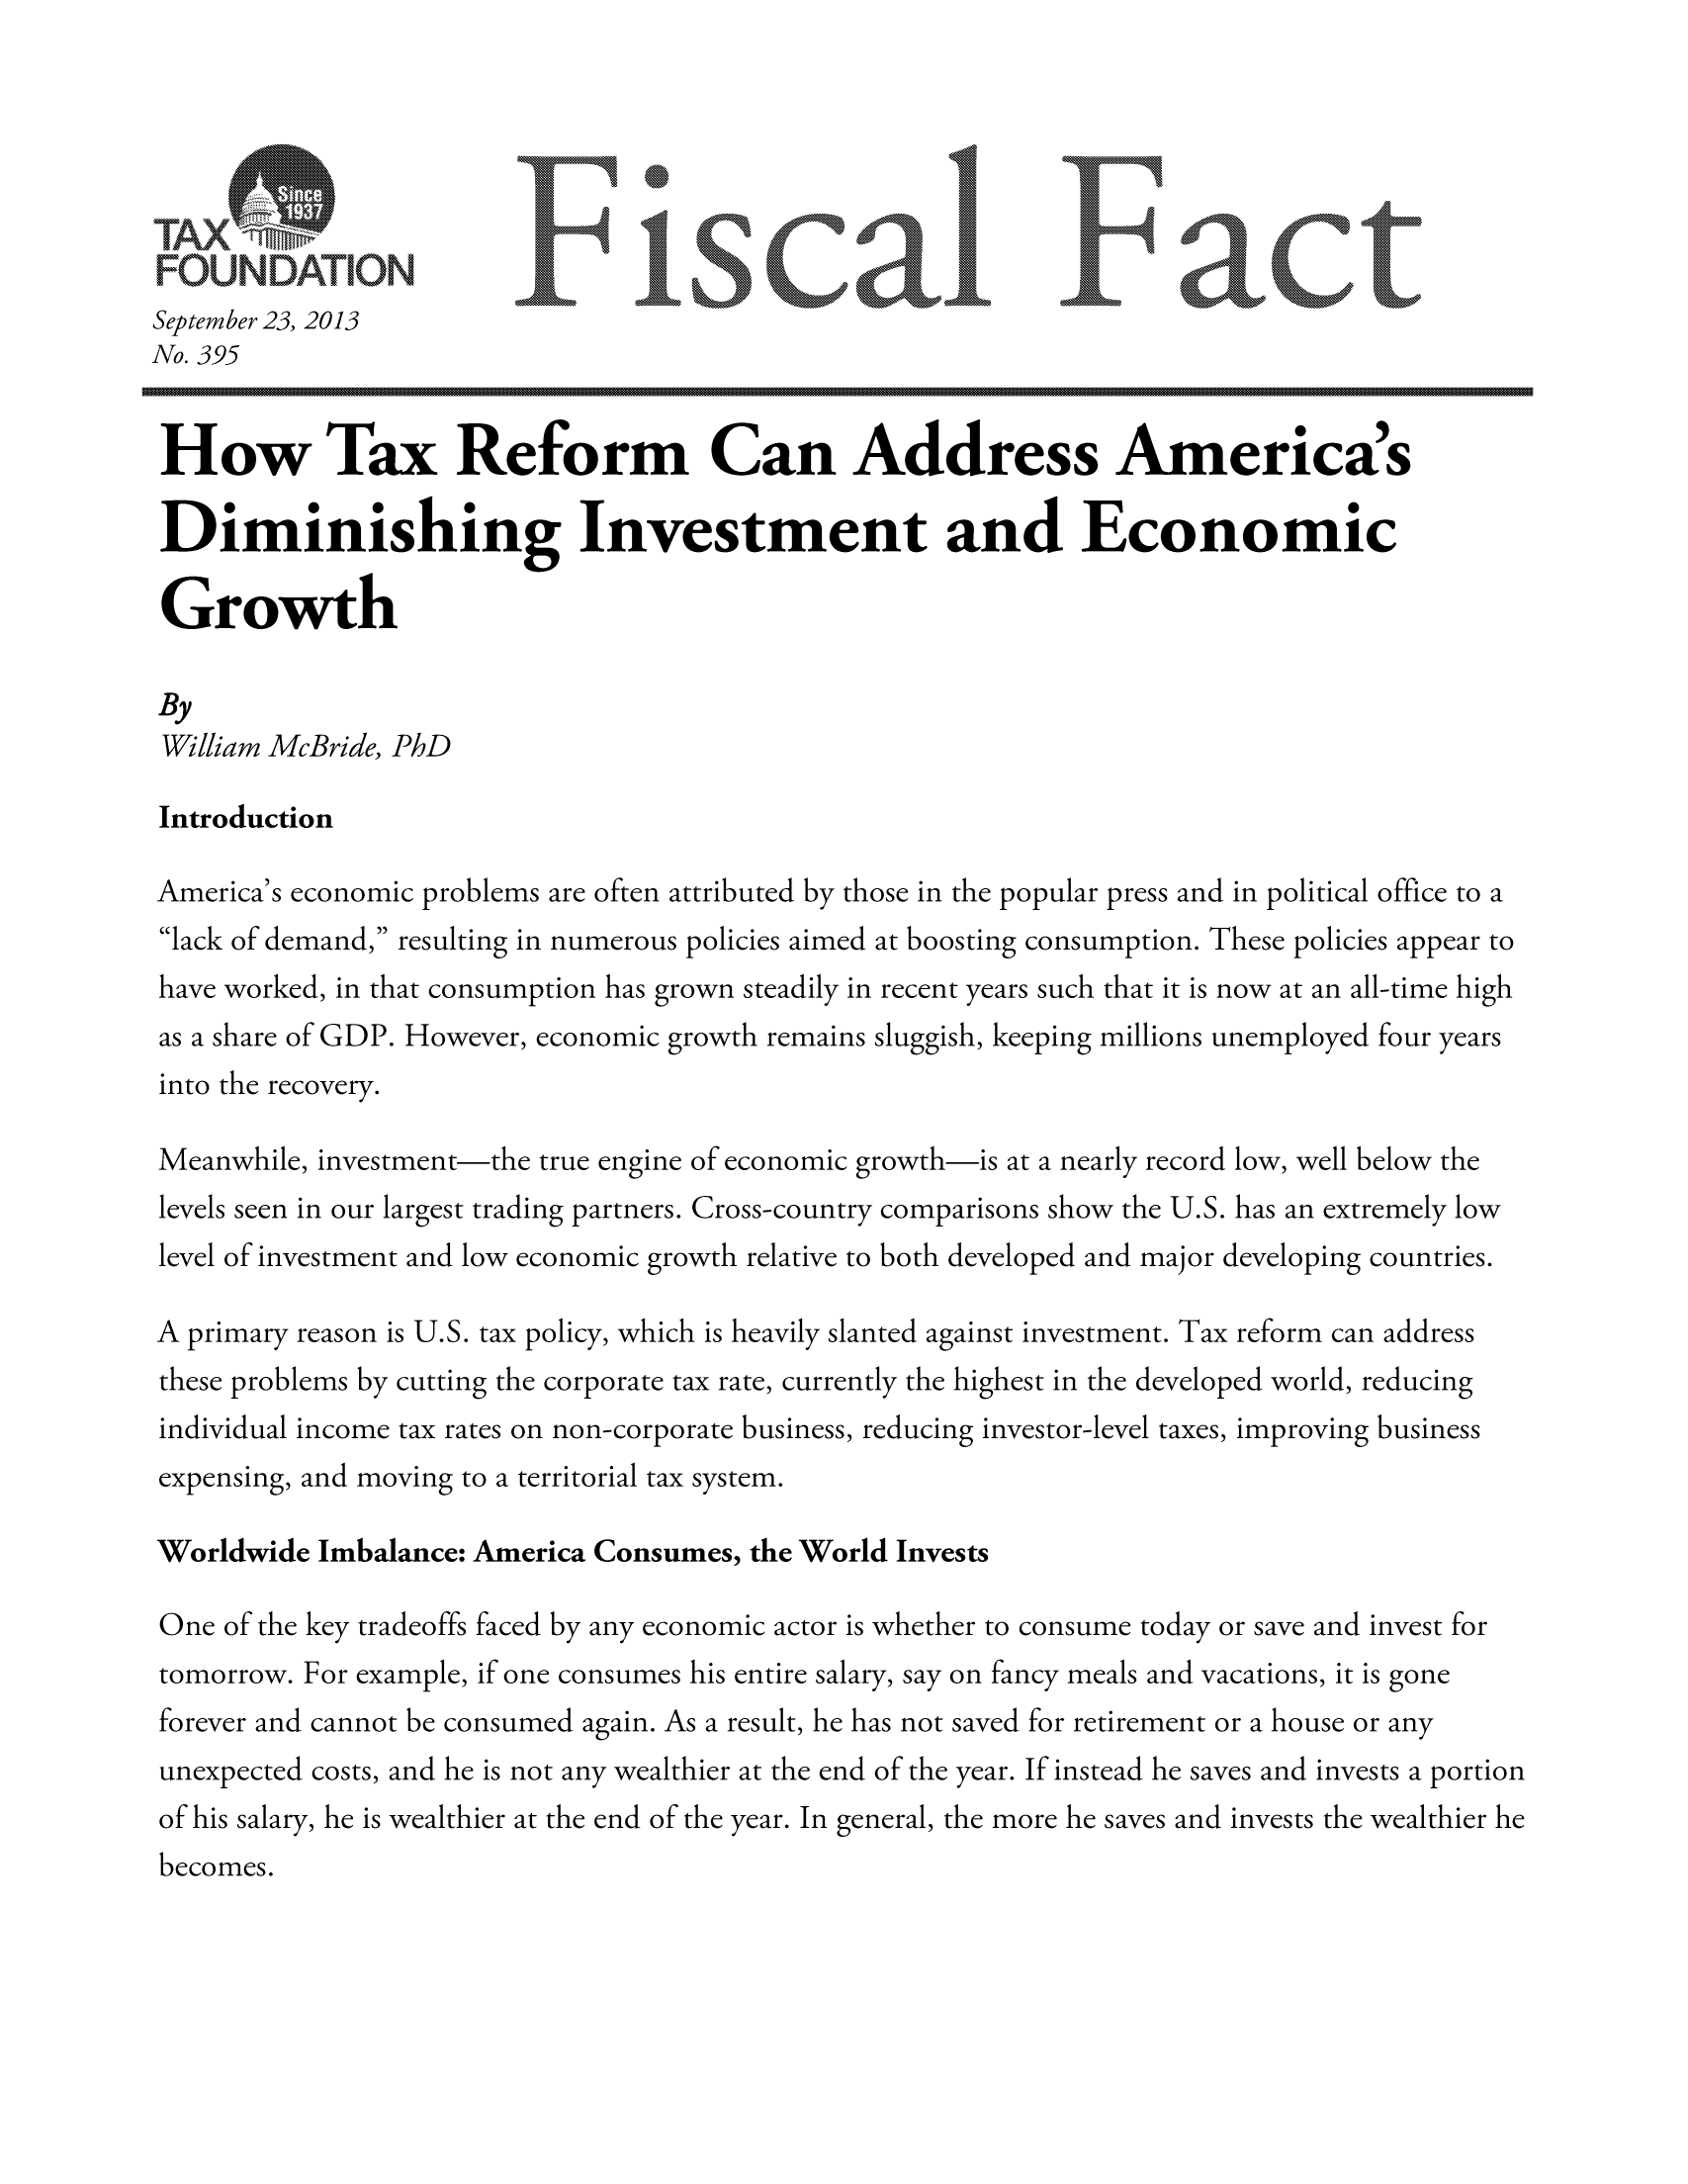 handle is hein.taxfoundation/ffdjfxz0001 and id is 1 raw text is: FOUNOATION]F                        scal Iact
September 23, 2013
No. 395
How Tax Reform Can Address America's
Diminishing Investment and Economic
Growth
By
William McBride, PhD
Introduction
America's economic problems are often attributed by those in the popular press and in political office to a
lack of demand, resulting in numerous policies aimed at boosting consumption. These policies appear to
have worked, in that consumption has grown steadily in recent years such that it is now at an all-time high
as a share of GDP. However, economic growth remains sluggish, keeping millions unemployed four years
into the recovery.
Meanwhile, investment-the true engine of economic growth-is at a nearly record low, well below the
levels seen in our largest trading partners. Cross-country comparisons show the U.S. has an extremely low
level of investment and low economic growth relative to both developed and major developing countries.
A primary reason is U.S. tax policy, which is heavily slanted against investment. Tax reform can address
these problems by cutting the corporate tax rate, currently the highest in the developed world, reducing
individual income tax rates on non-corporate business, reducing investor-level taxes, improving business
expensing, and moving to a territorial tax system.
Worldwide Imbalance: America Consumes, the World Invests
One of the key tradeoffs faced by any economic actor is whether to consume today or save and invest for
tomorrow. For example, if one consumes his entire salary, say on fancy meals and vacations, it is gone
forever and cannot be consumed again. As a result, he has not saved for retirement or a house or any
unexpected costs, and he is not any wealthier at the end of the year. If instead he saves and invests a portion
of his salary, he is wealthier at the end of the year. In general, the more he saves and invests the wealthier he
becomes.


